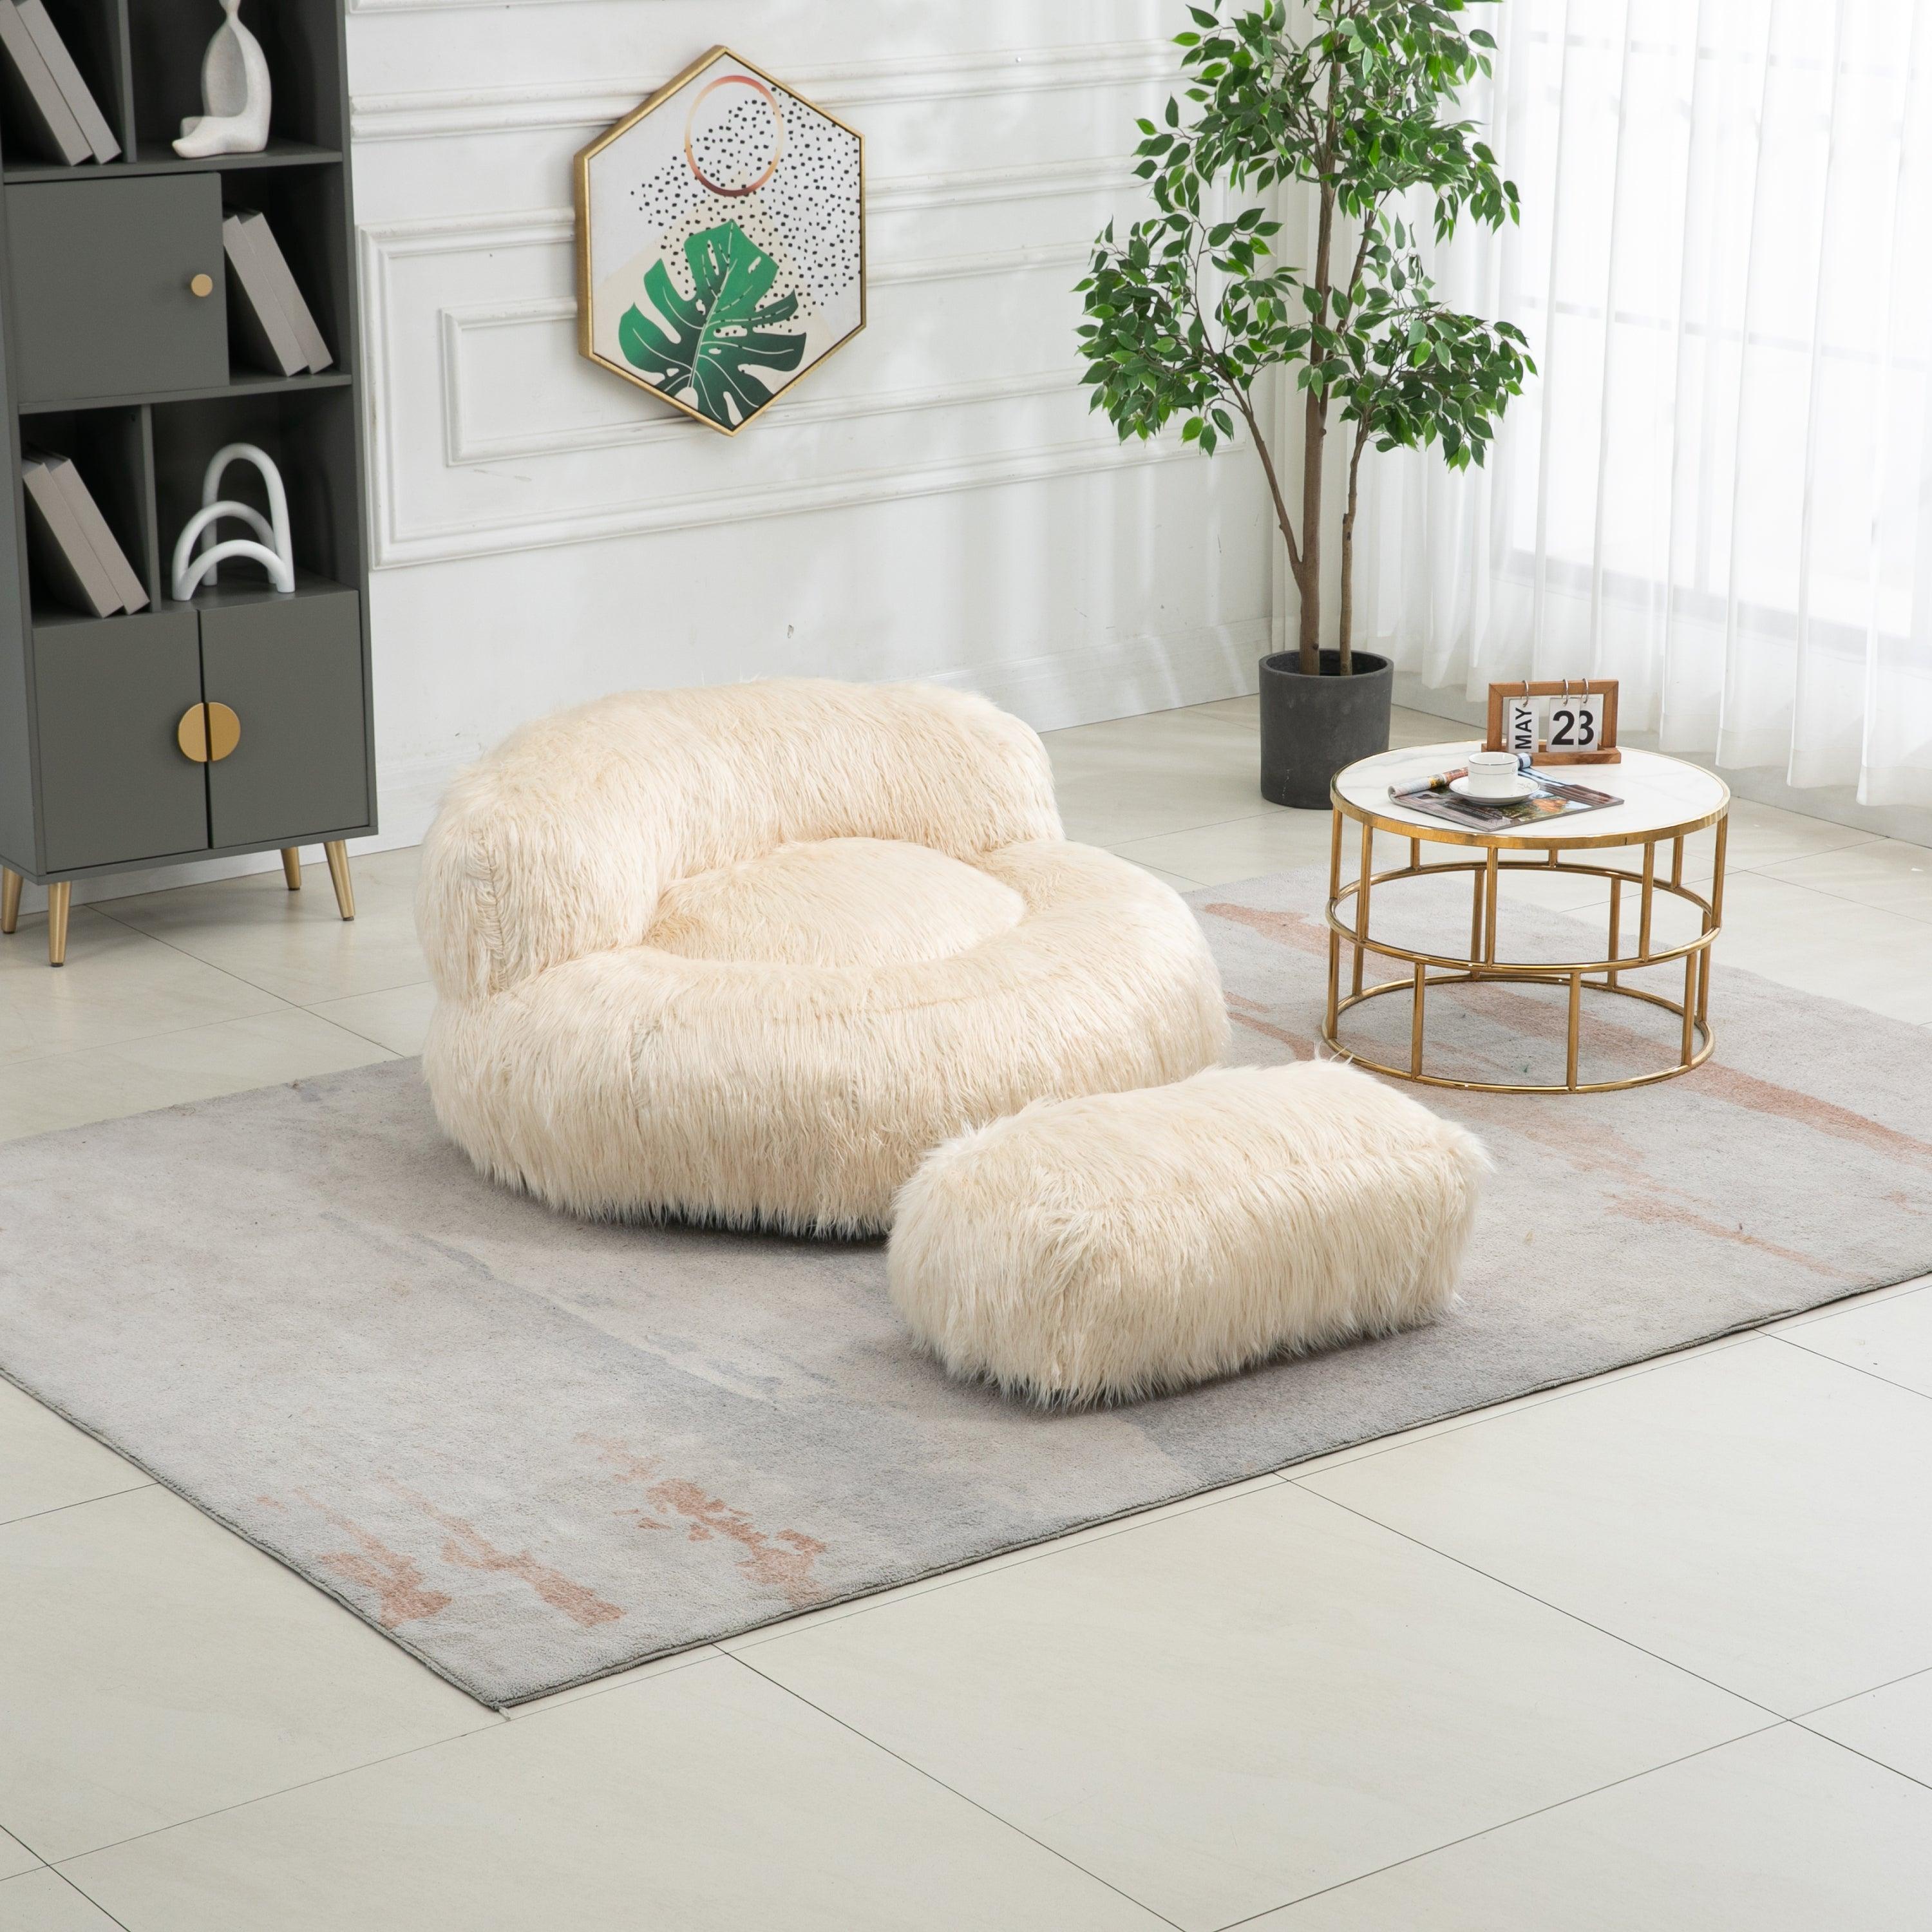 Gramanda 2-In-1 Bean Bag Chair Faux Fur Lazy Sofa & Ottoman Footstool For Adults And Kids - Beige